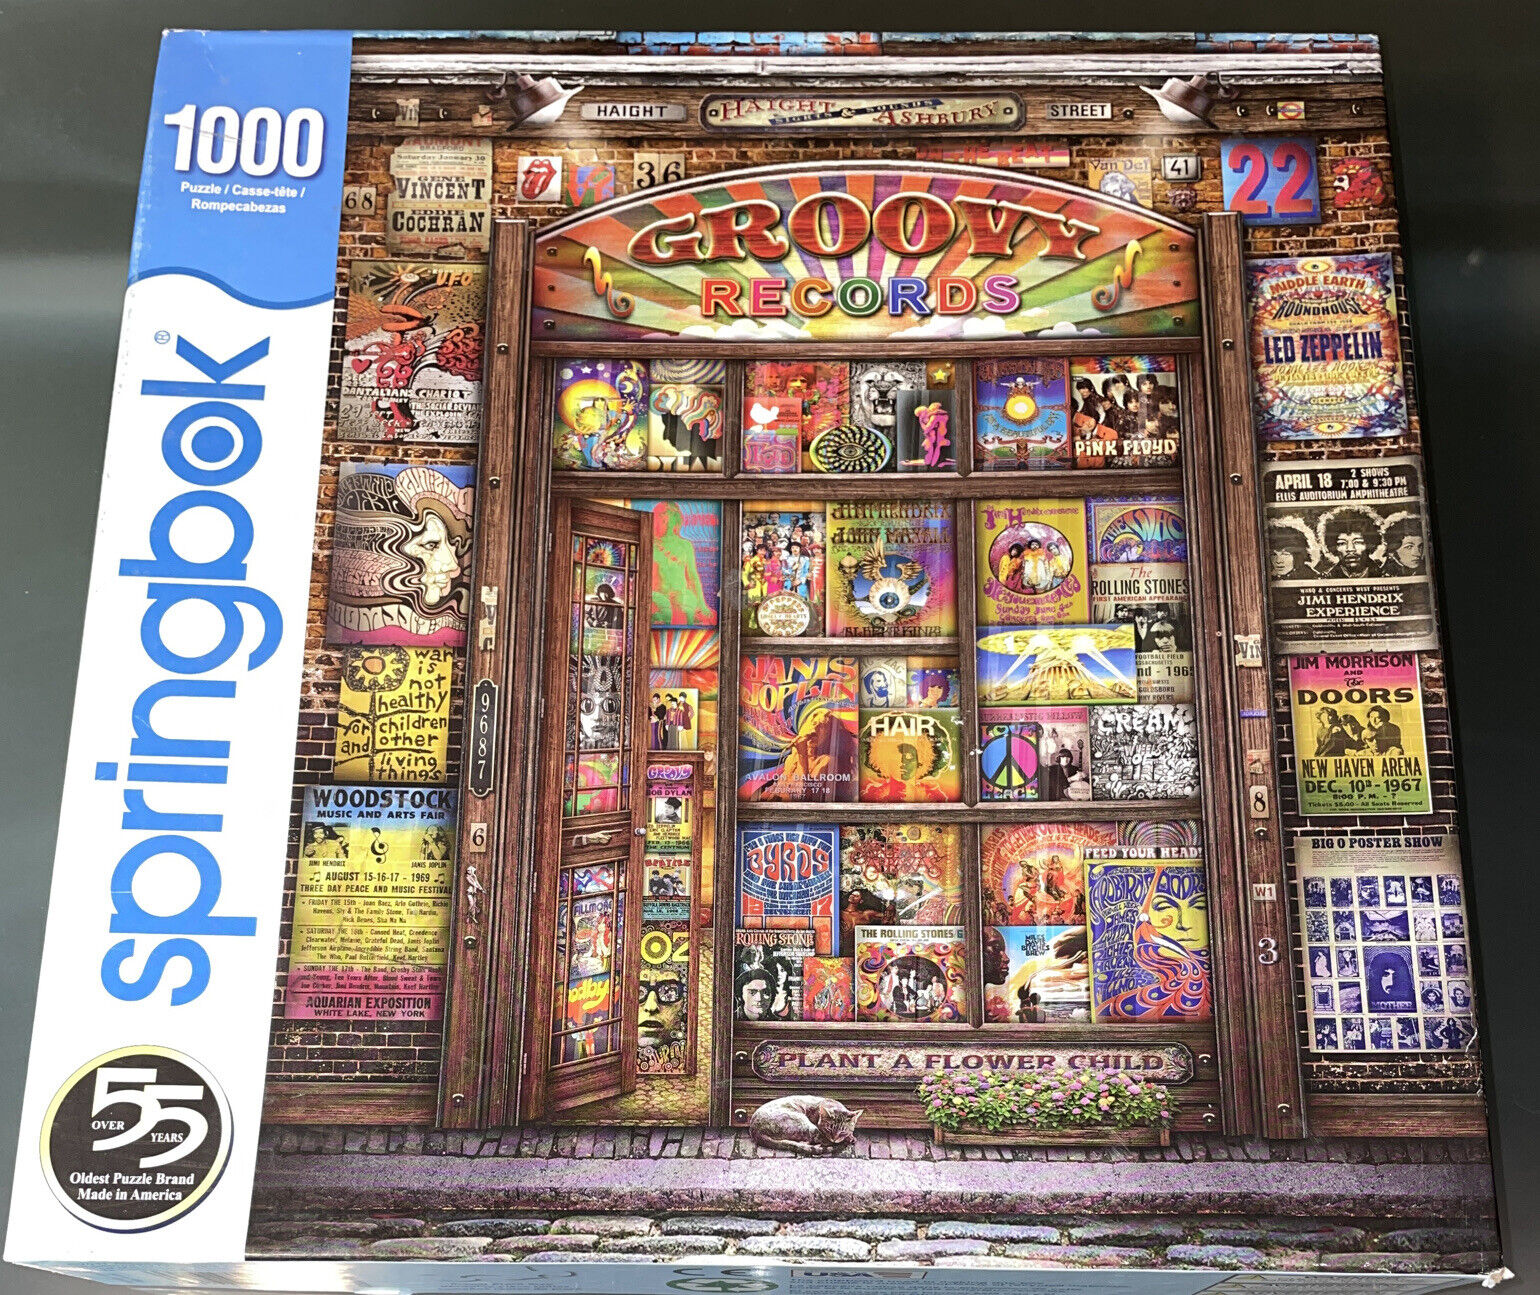 SPRINGBOK GROOVY RECORDS 1000 PIECE JIGSAW PUZZLE Record Music Cover Artwork Art